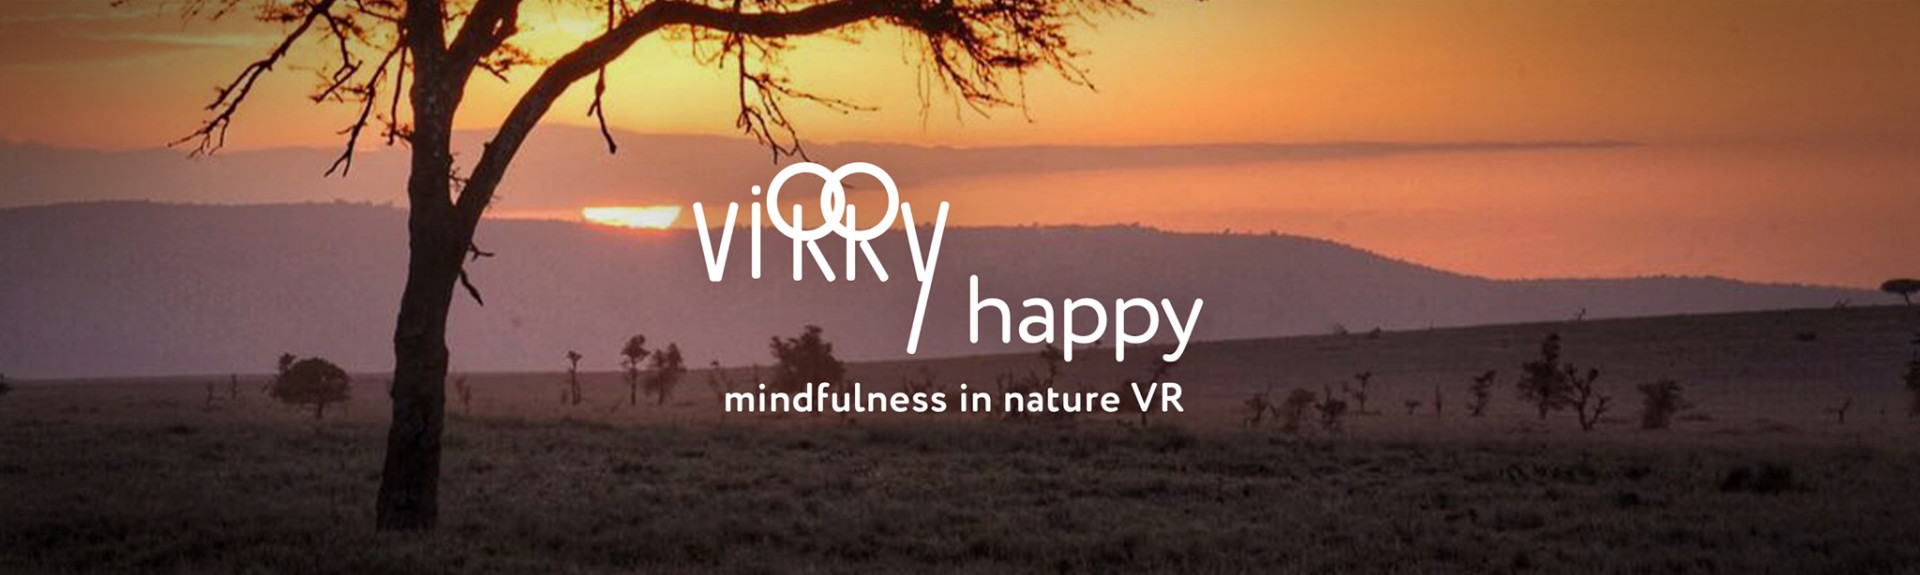 Virry Happy: mindfulness in nature VR